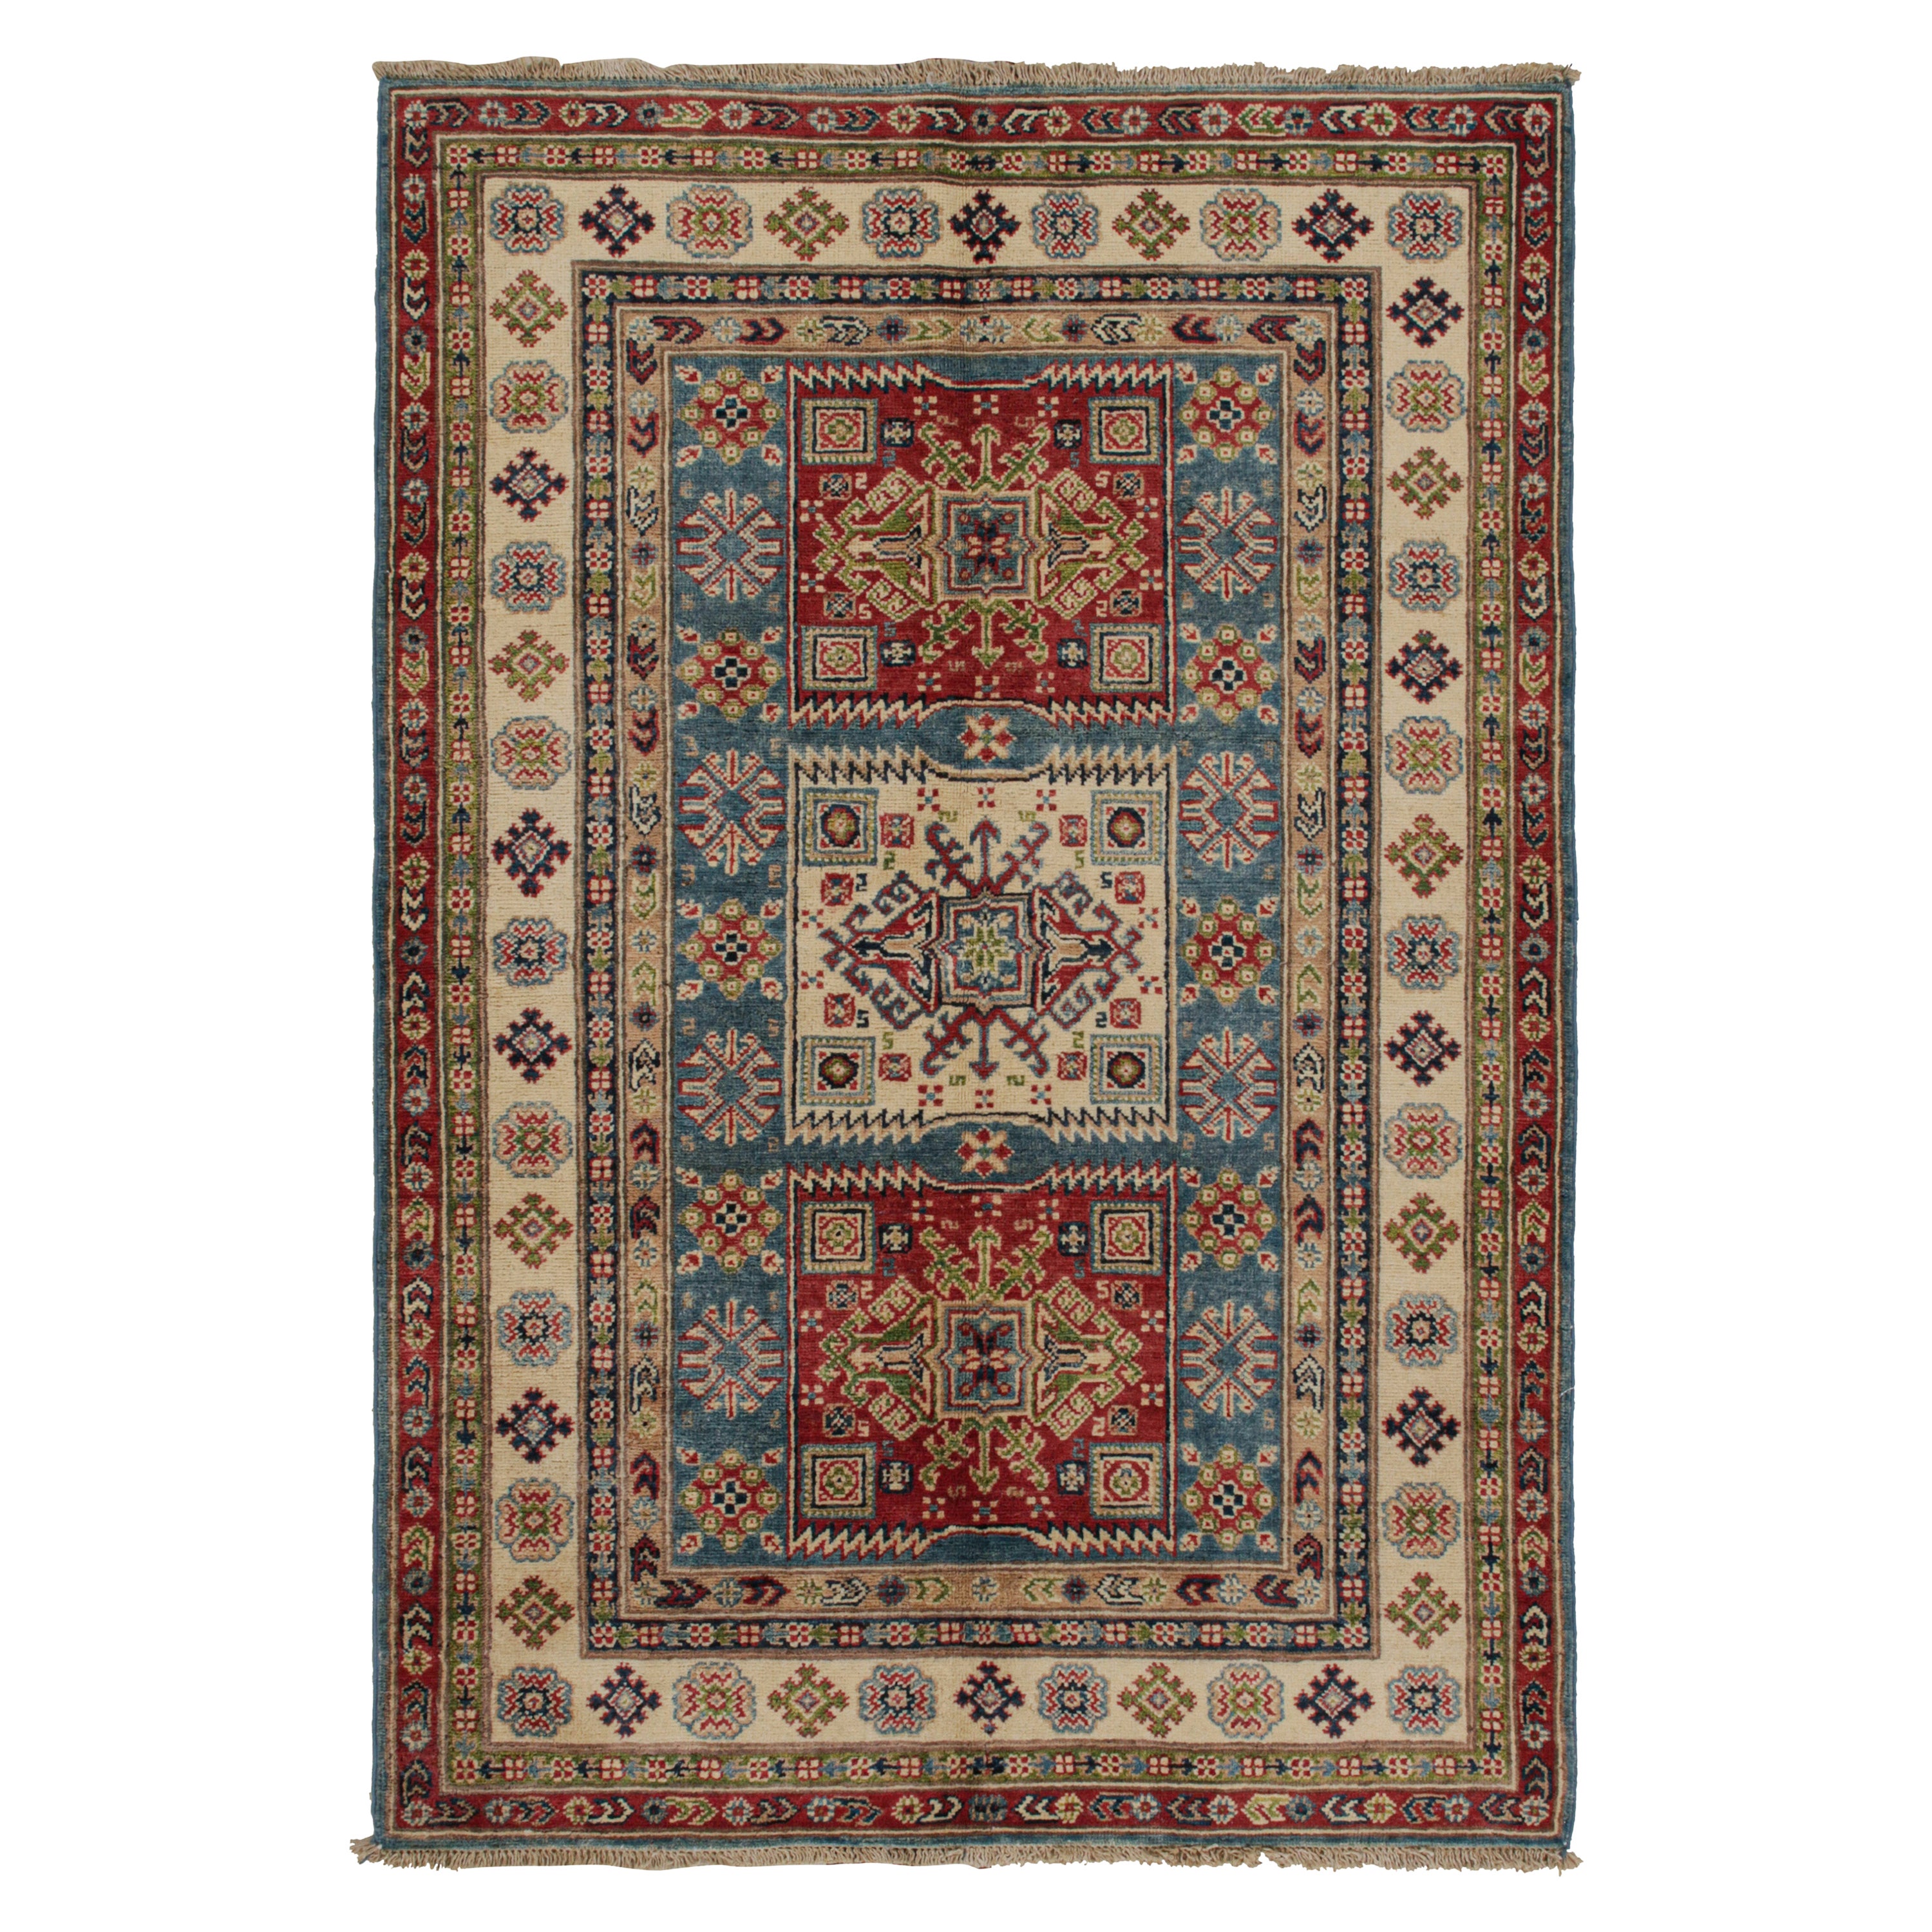 Rug & Kilim’s Kazak style rug in Red, Blue and Beige-Brown Geometric Patterns For Sale